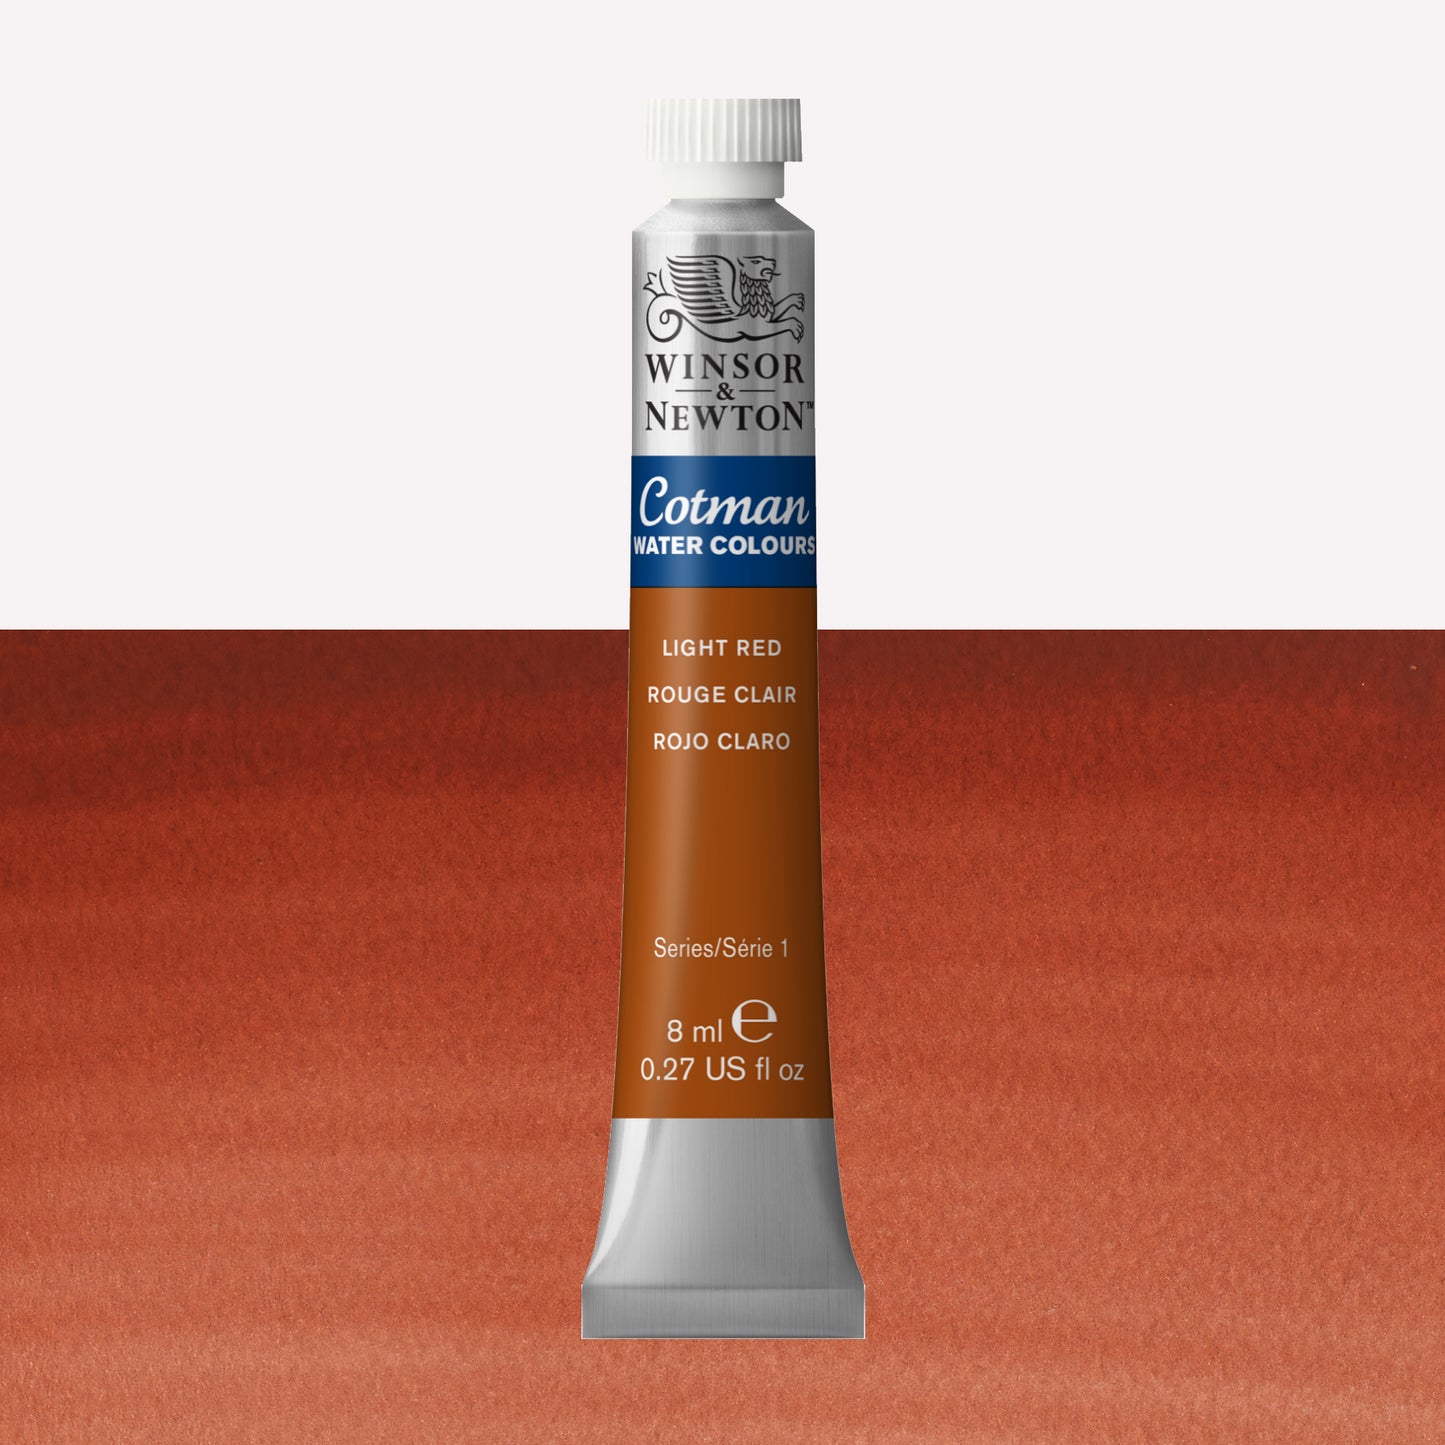 Winsor & Newton Cotman watercolour paint packaged in 8ml silver tube with a white lid in the shade Light Red over a highly pigmented colour swatch.